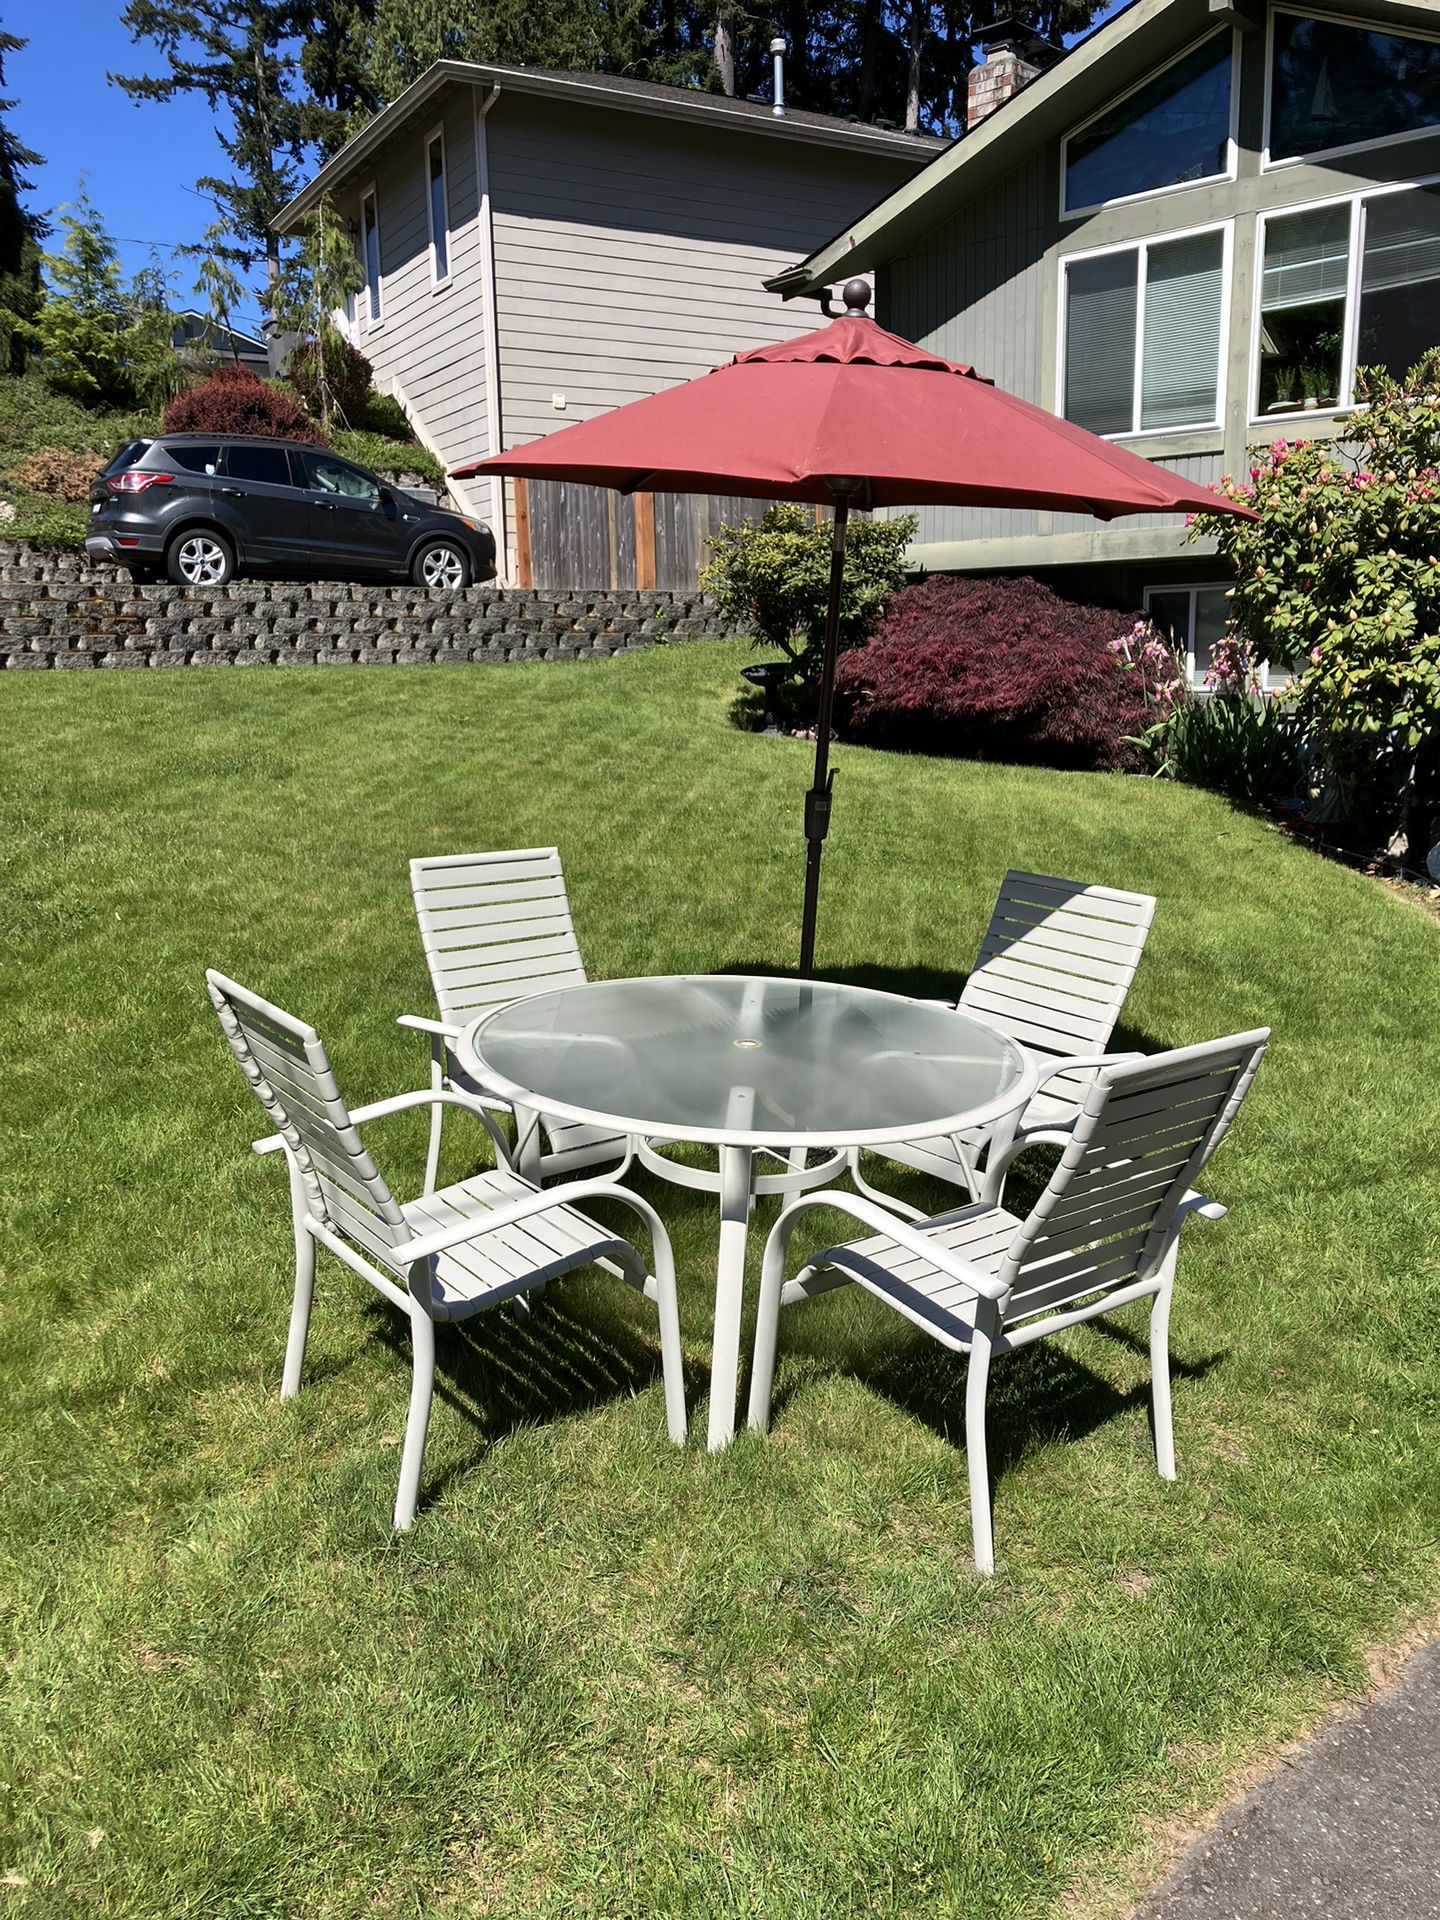 HUGE DEAL in a Patio Table, Chairs & Umbrella! VERY CLEAN!